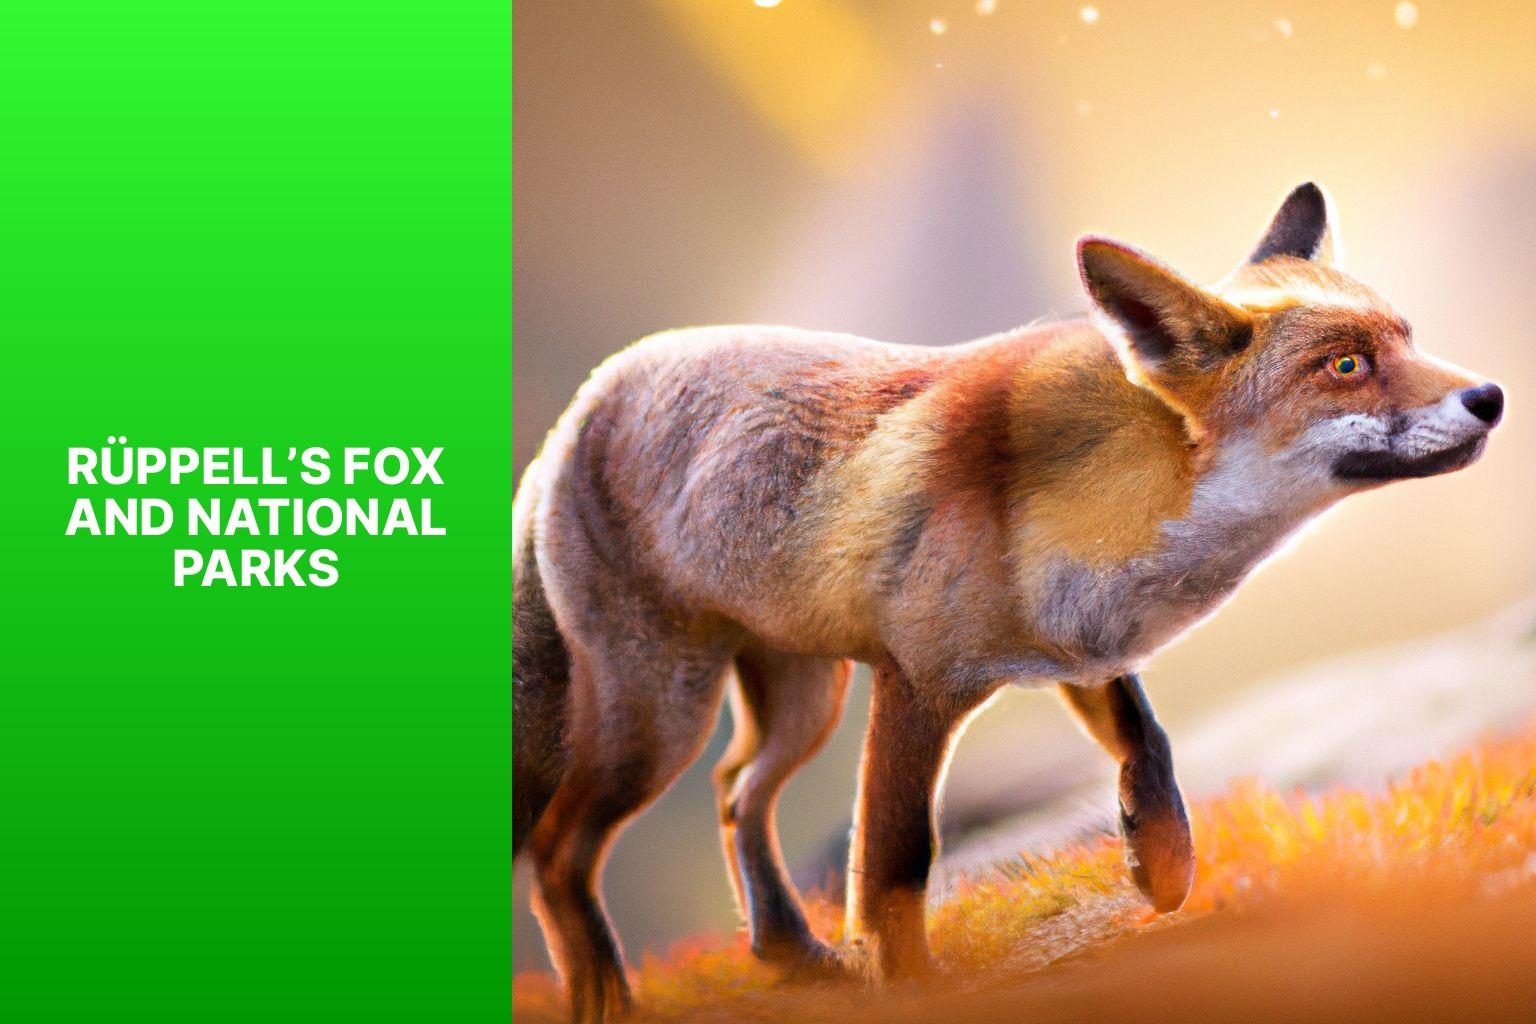 R ppell s Fox and National Parks - R ppell s Fox in National Parks 